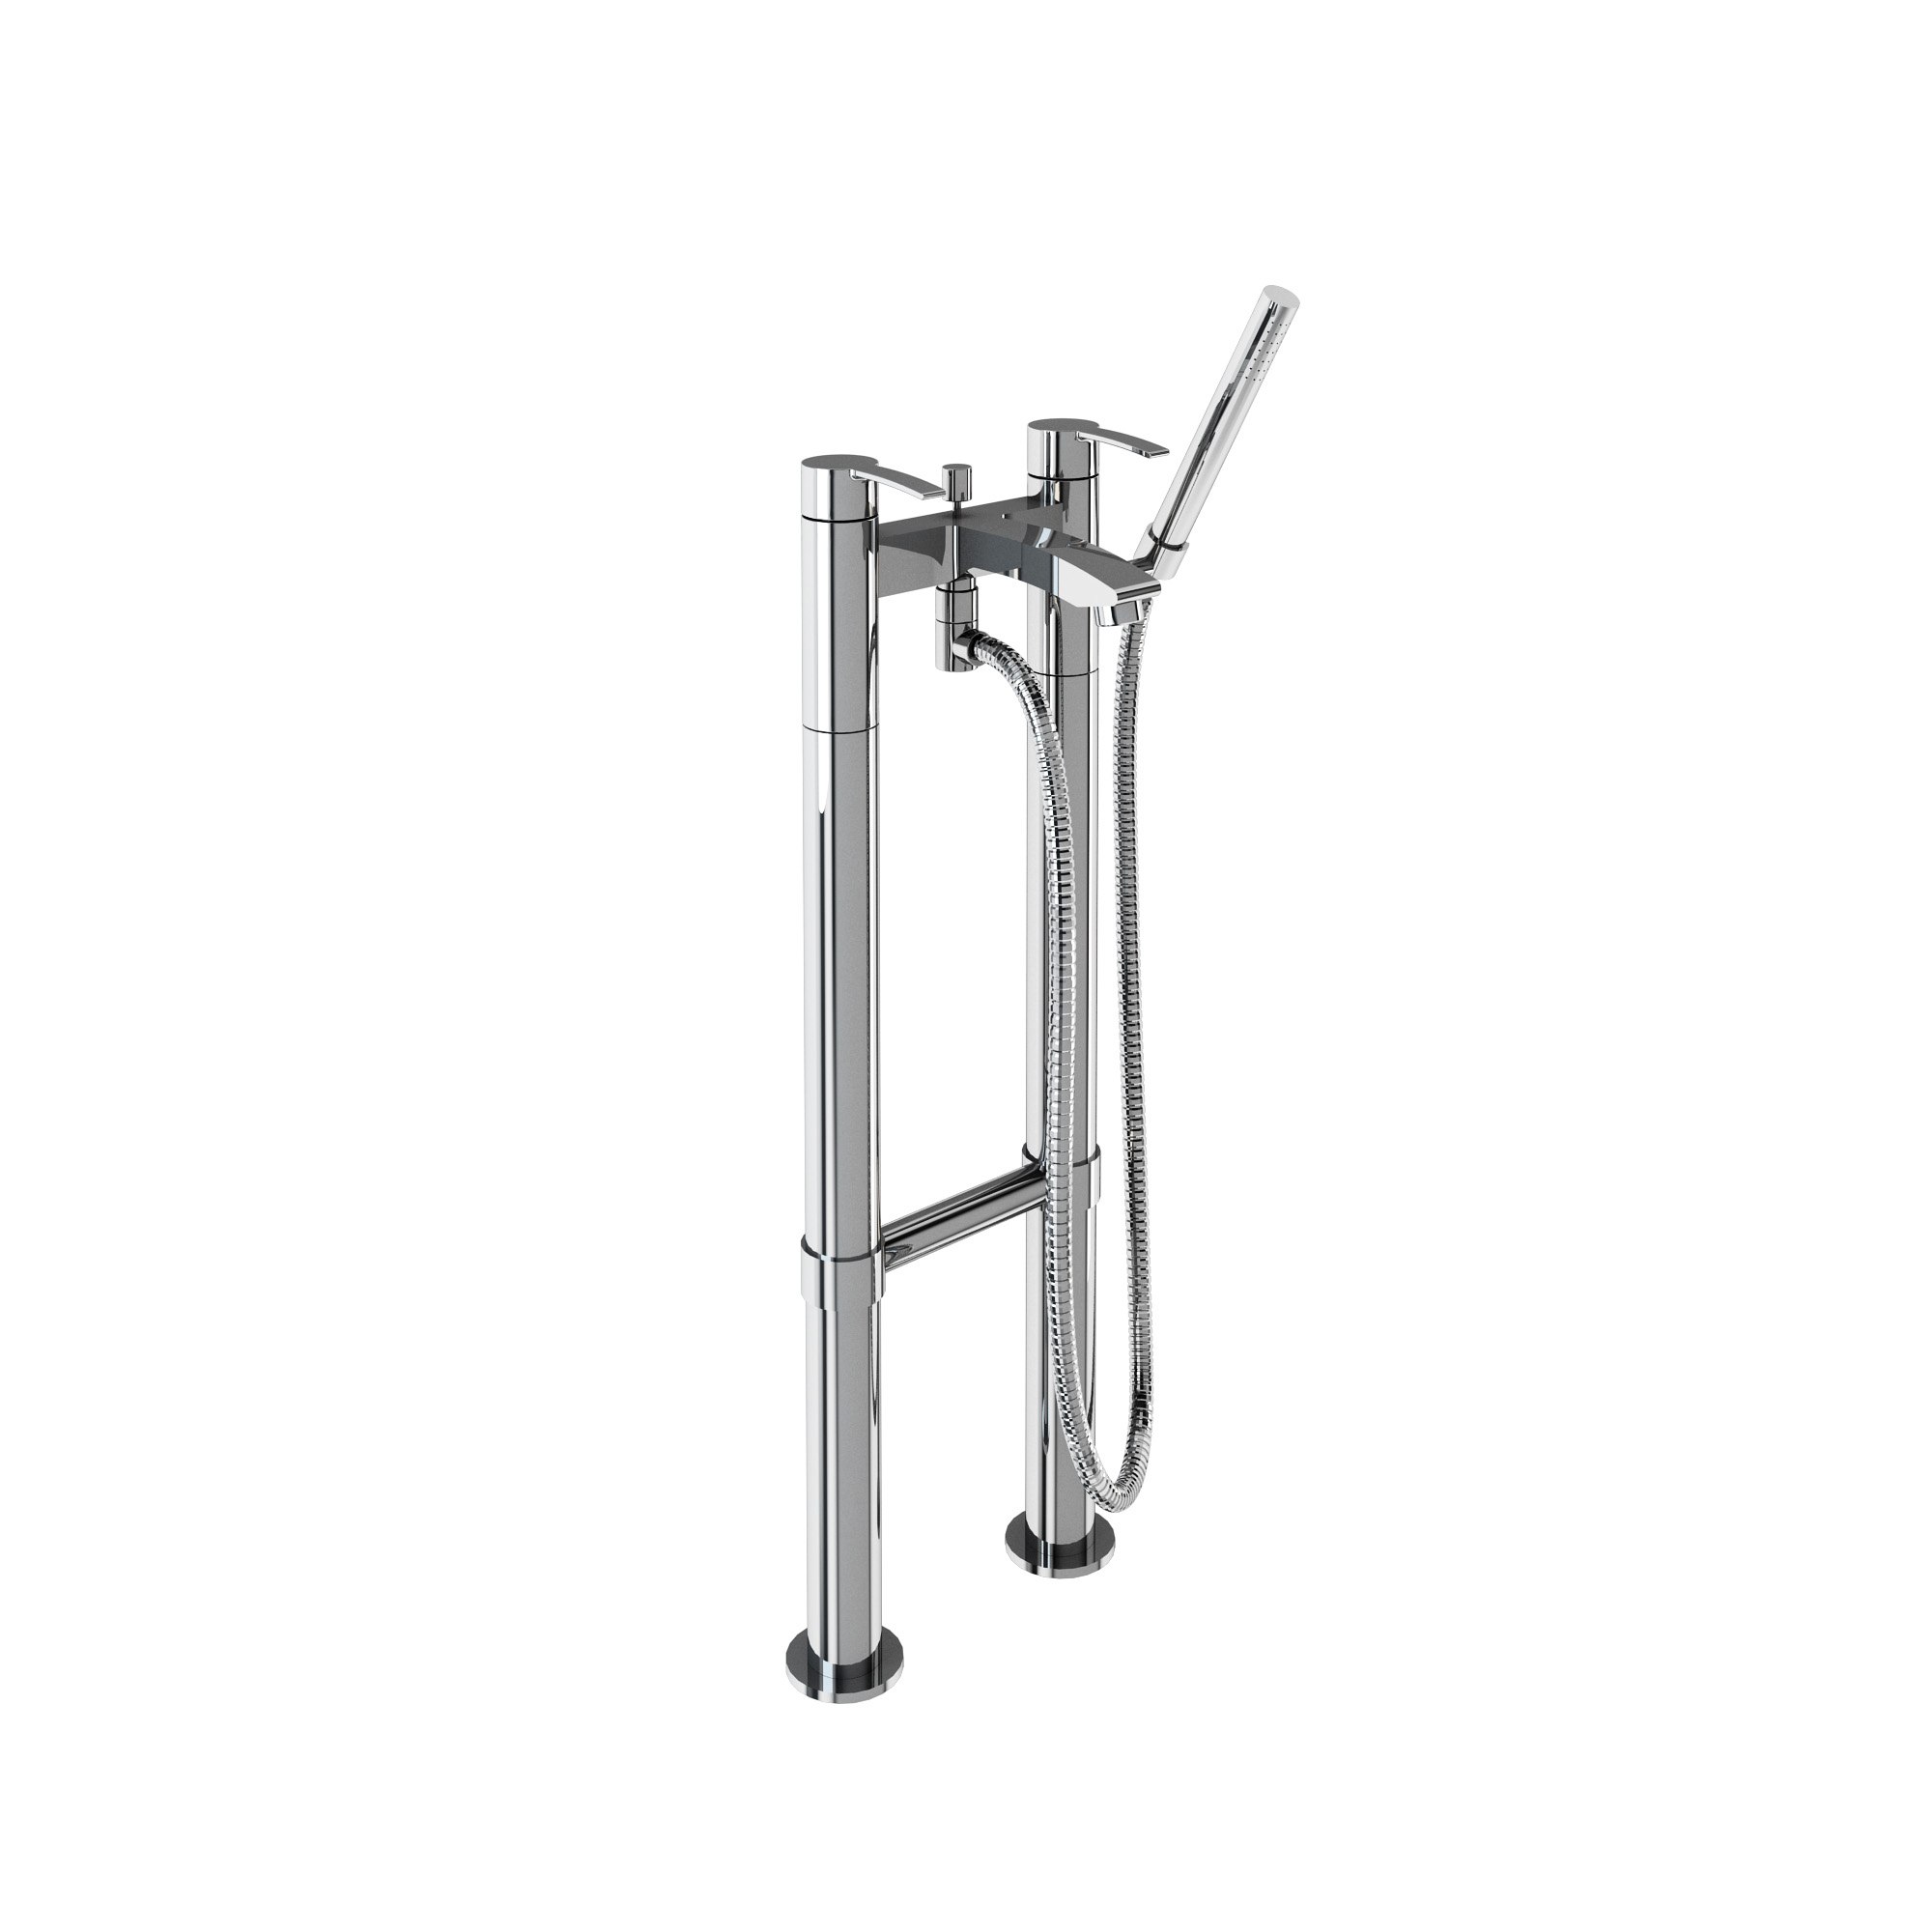 Sapphire bath shower mixer filler on stand pipes floor-standing